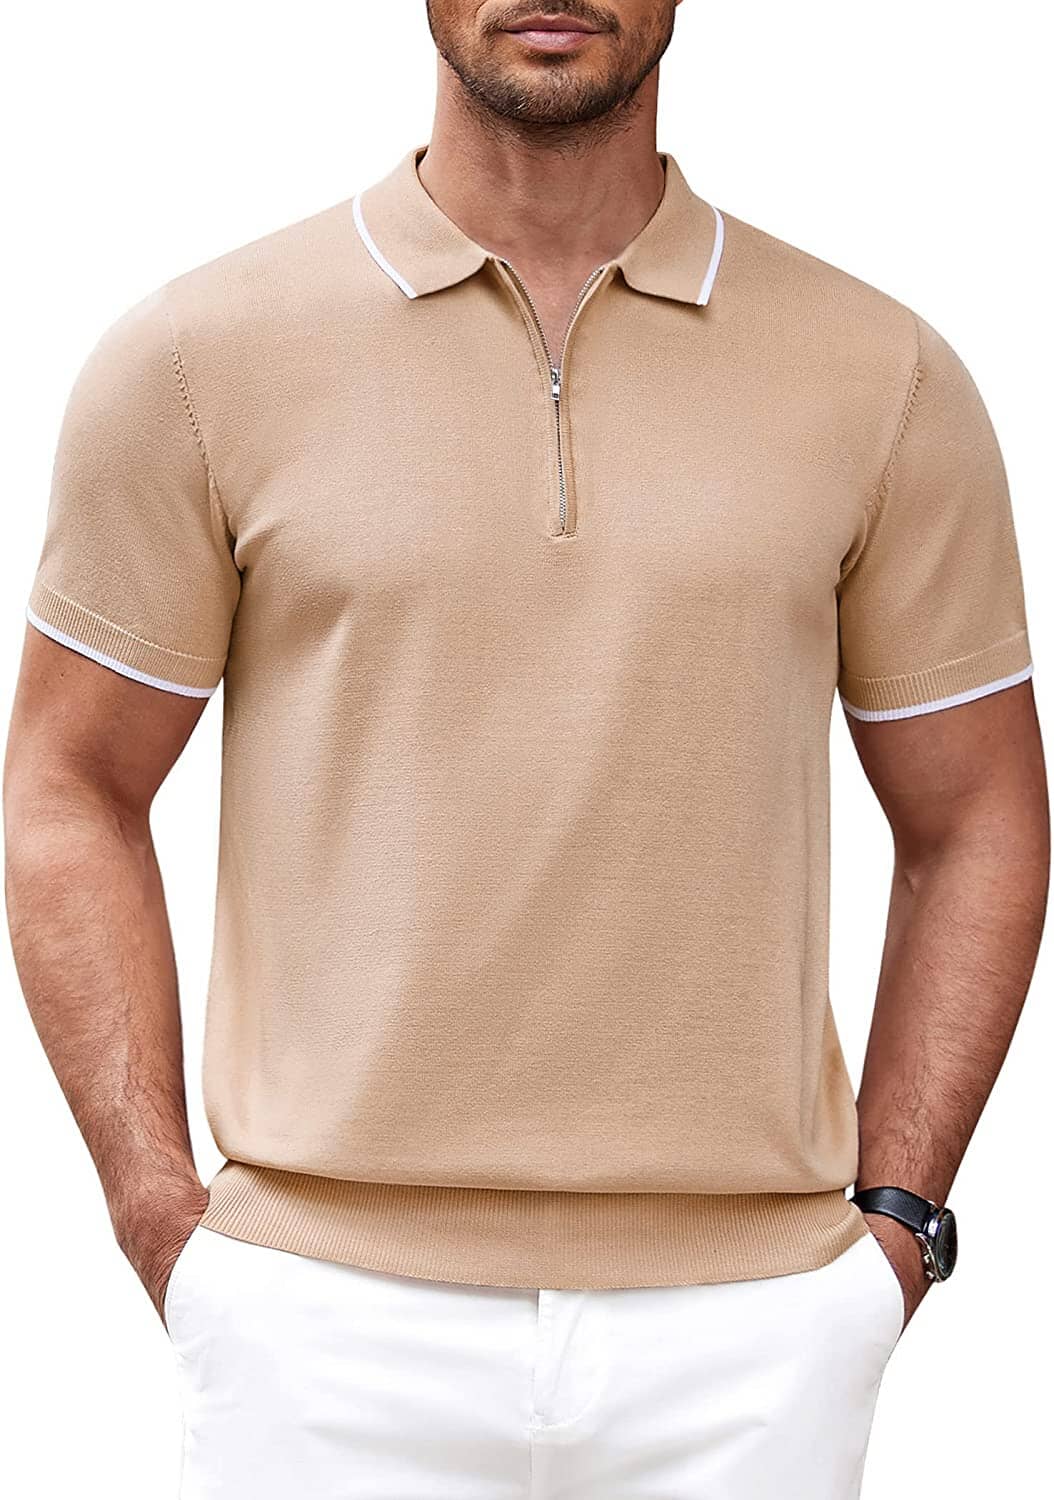 Classic Zipper Short Sleeve Polo Shirt (US Only) Polos COOFANDY Store Light Tan S 